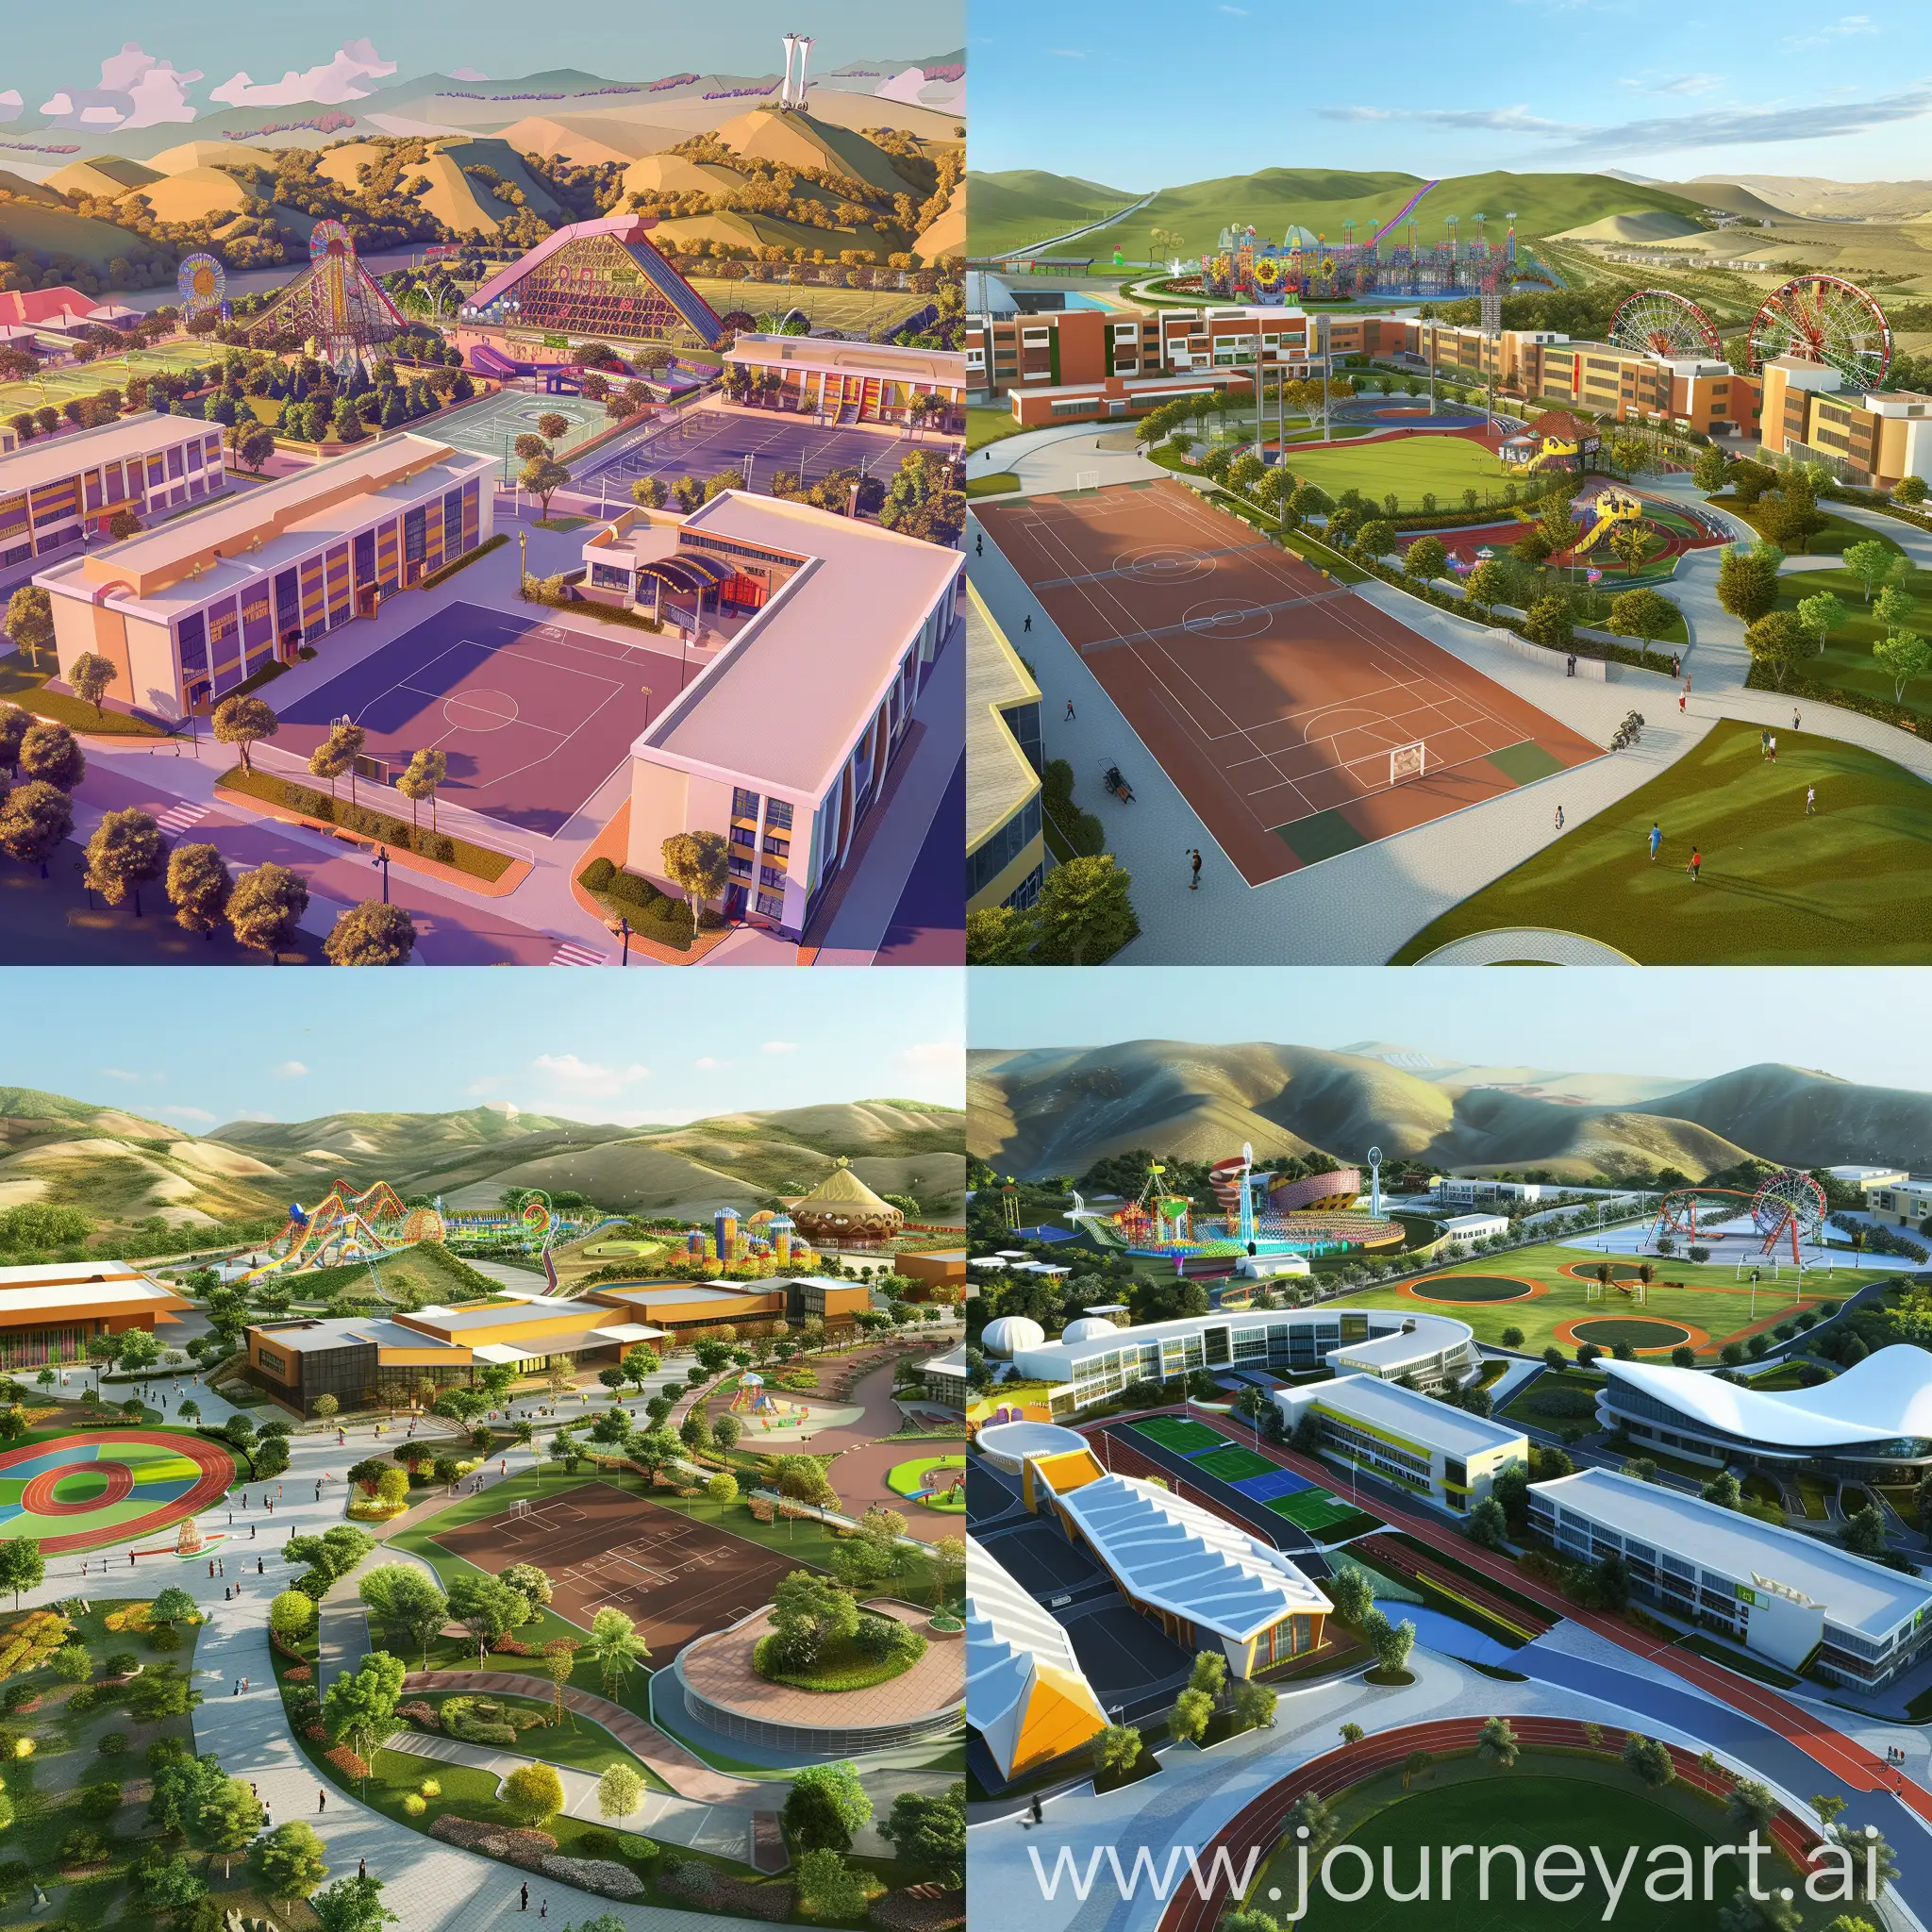 Luxurious-Modern-Boys-School-with-Expansive-Sports-Zone-and-Scenic-Theme-Park